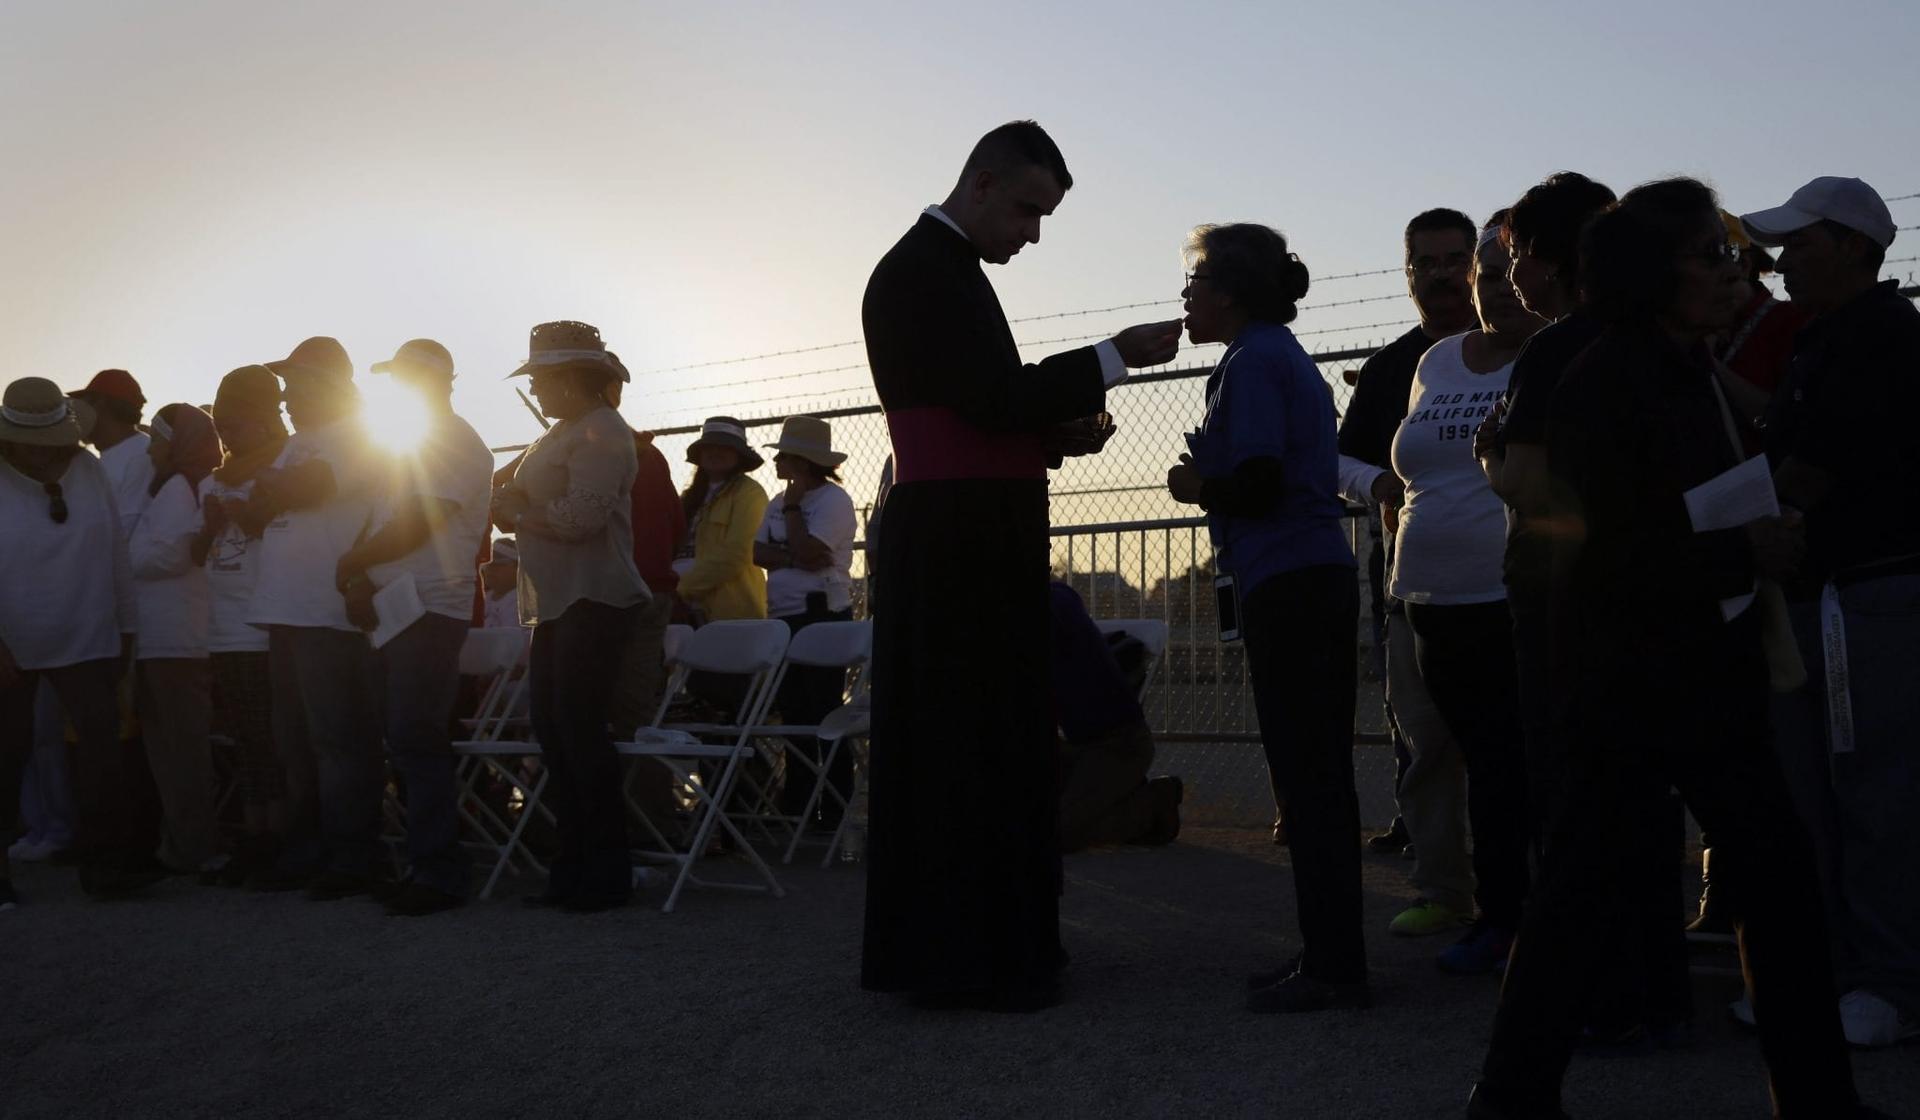 Even in Francis era, it’s okay to have doubts on immigration